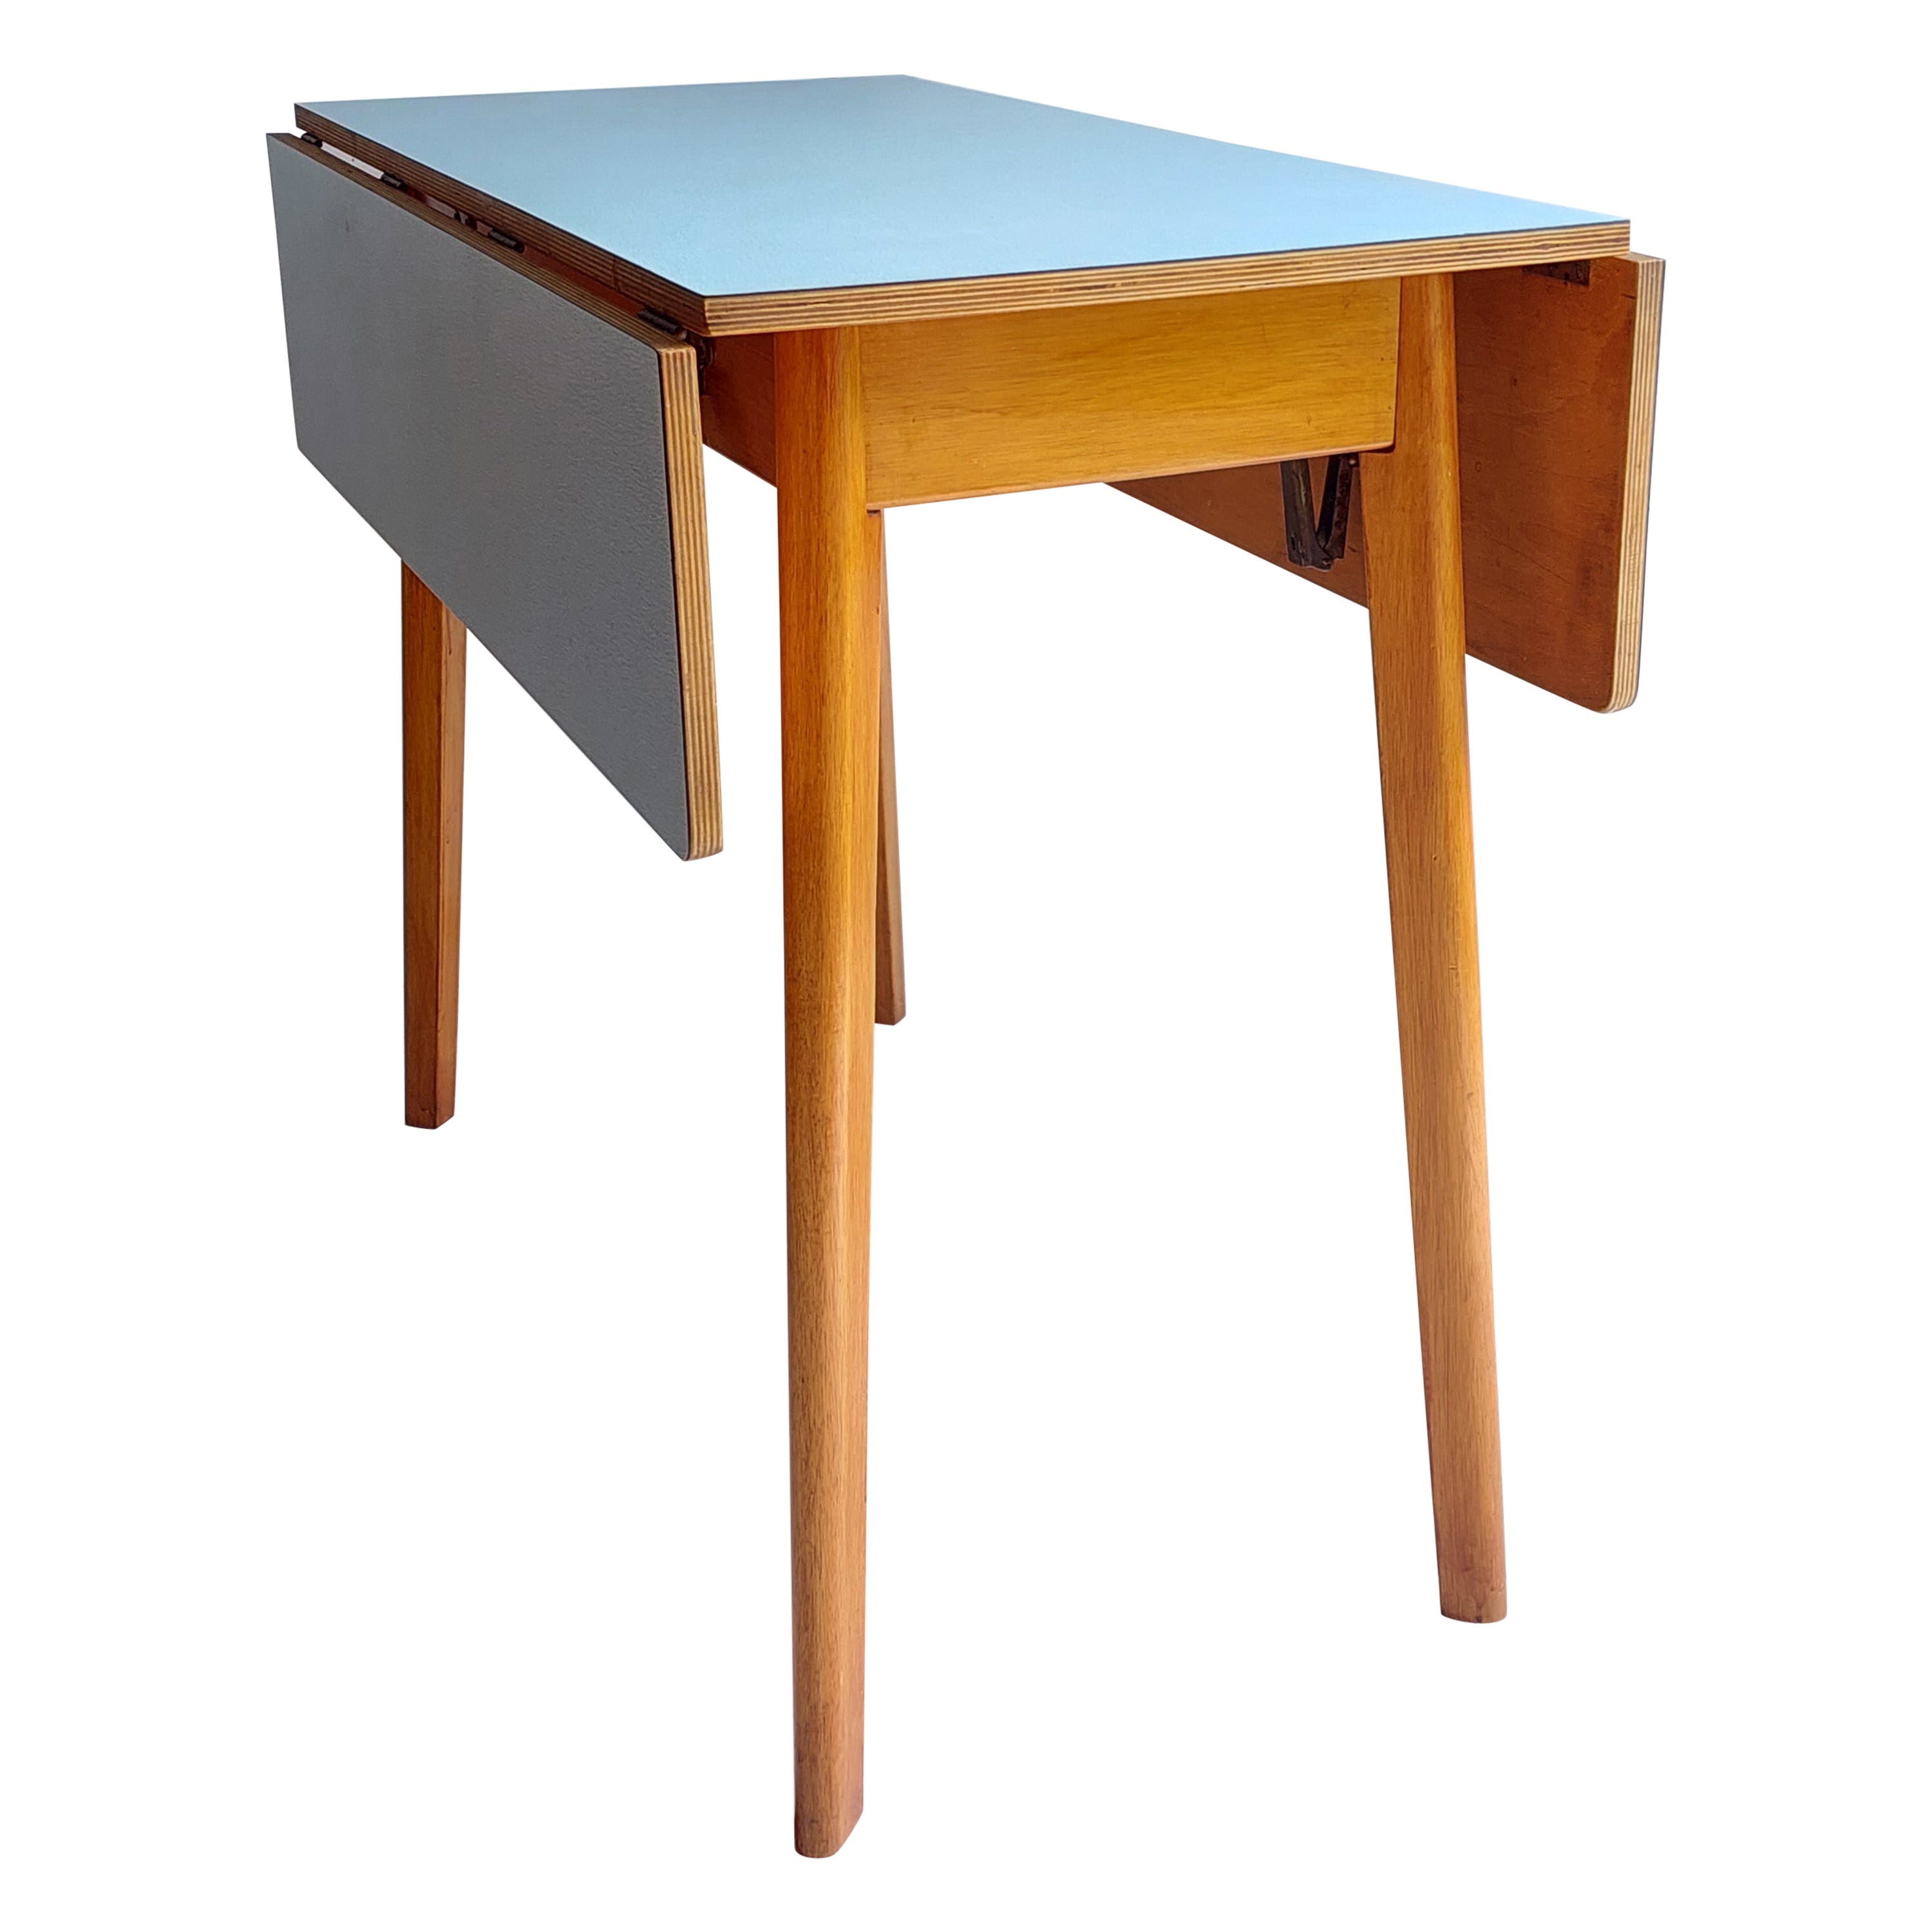 Mid Century Blue Formica Drop Leaf Kitchen Dining Table With Wooden Legs 60s For Sale